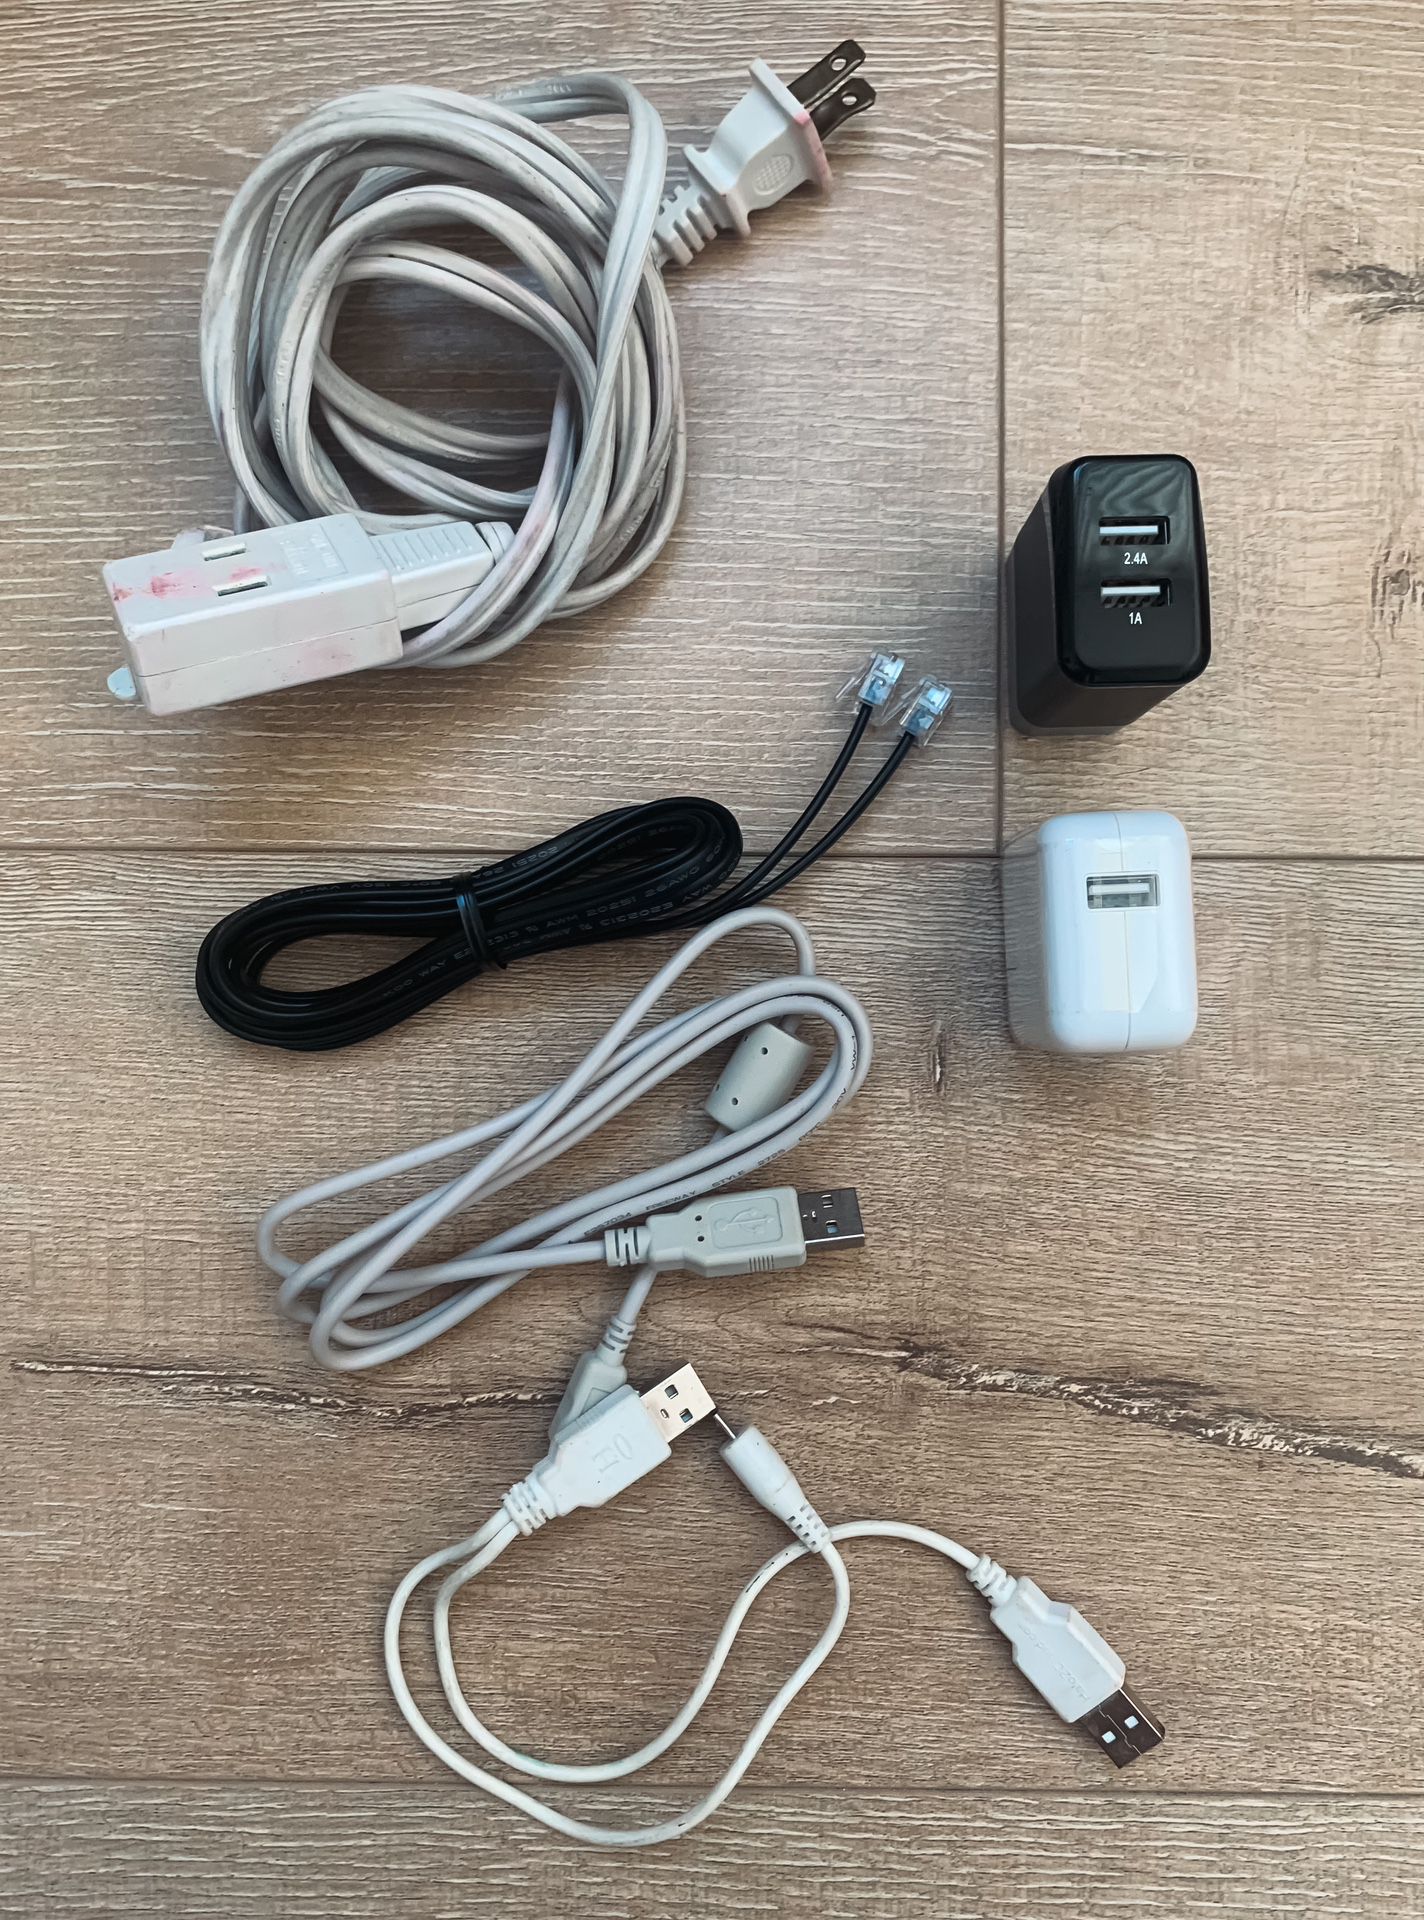 Cable and charger lot